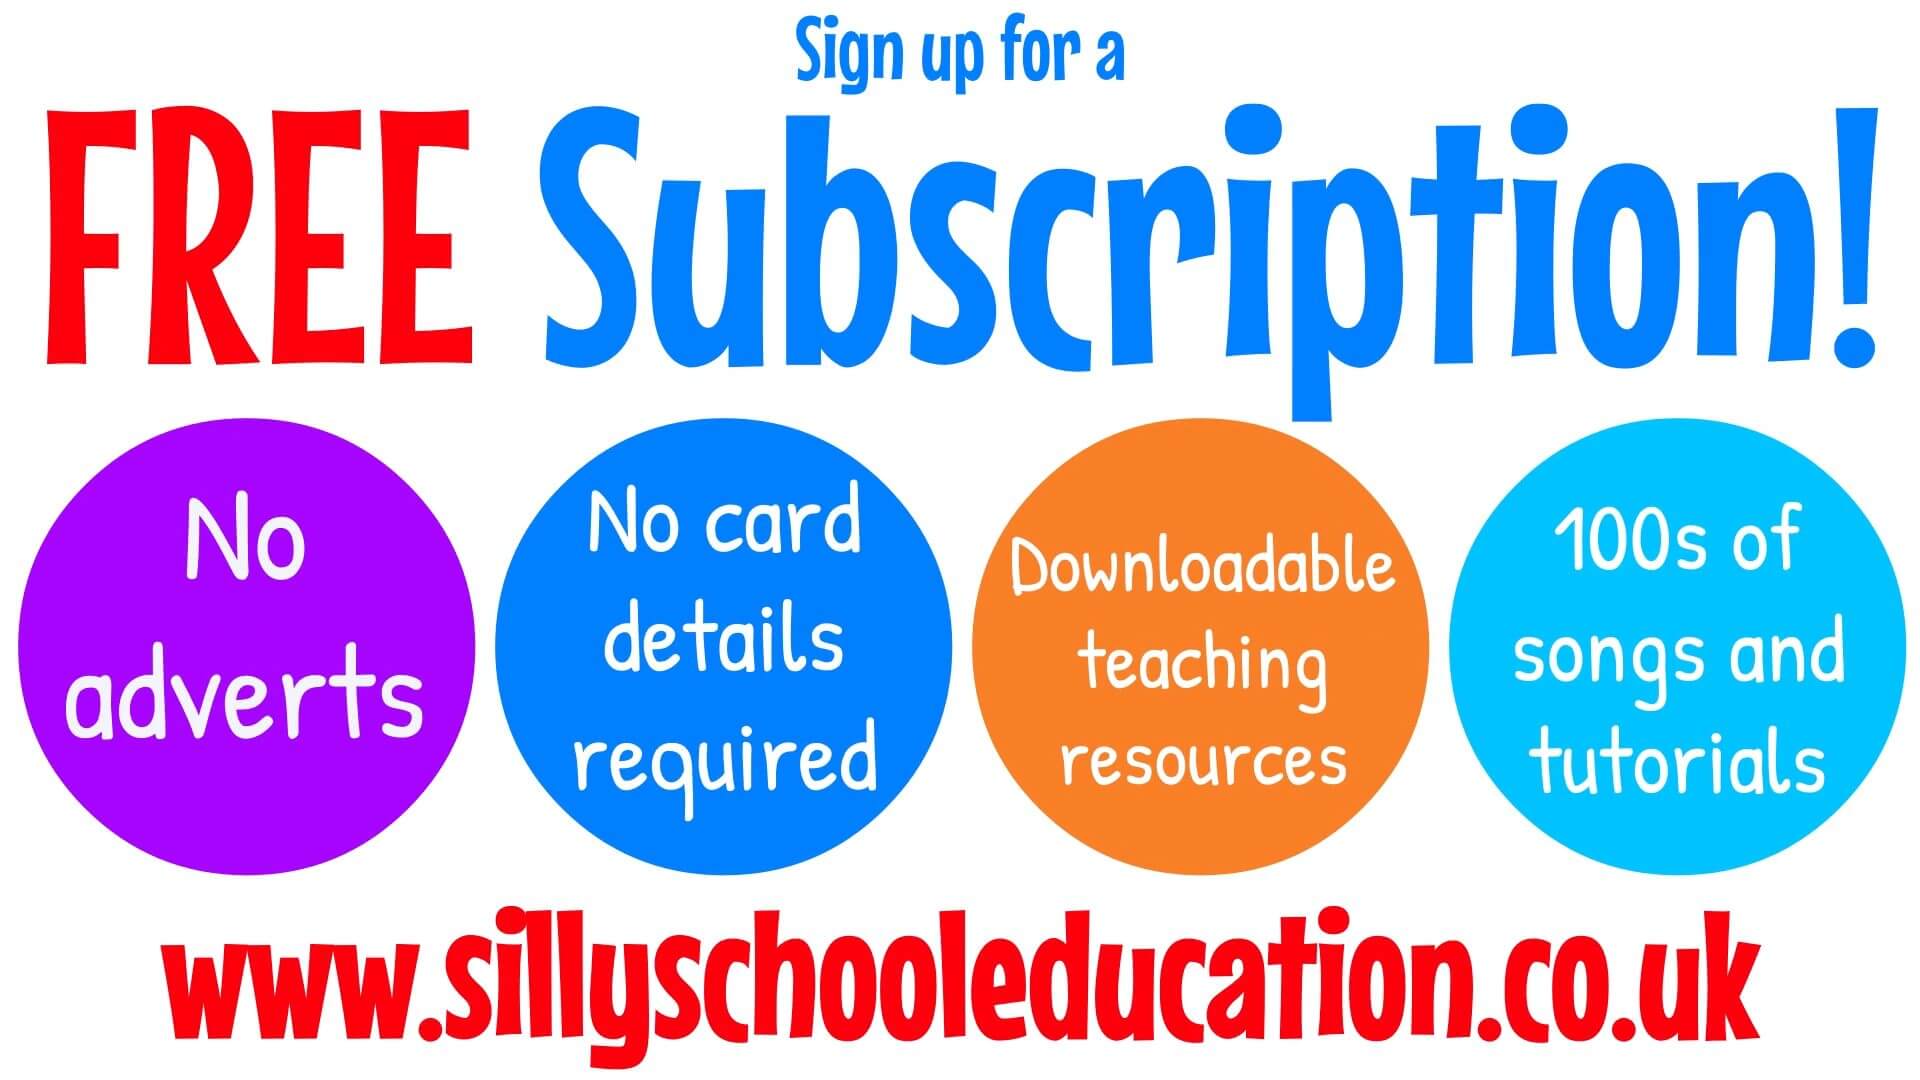 Silly School Education Free Subscription